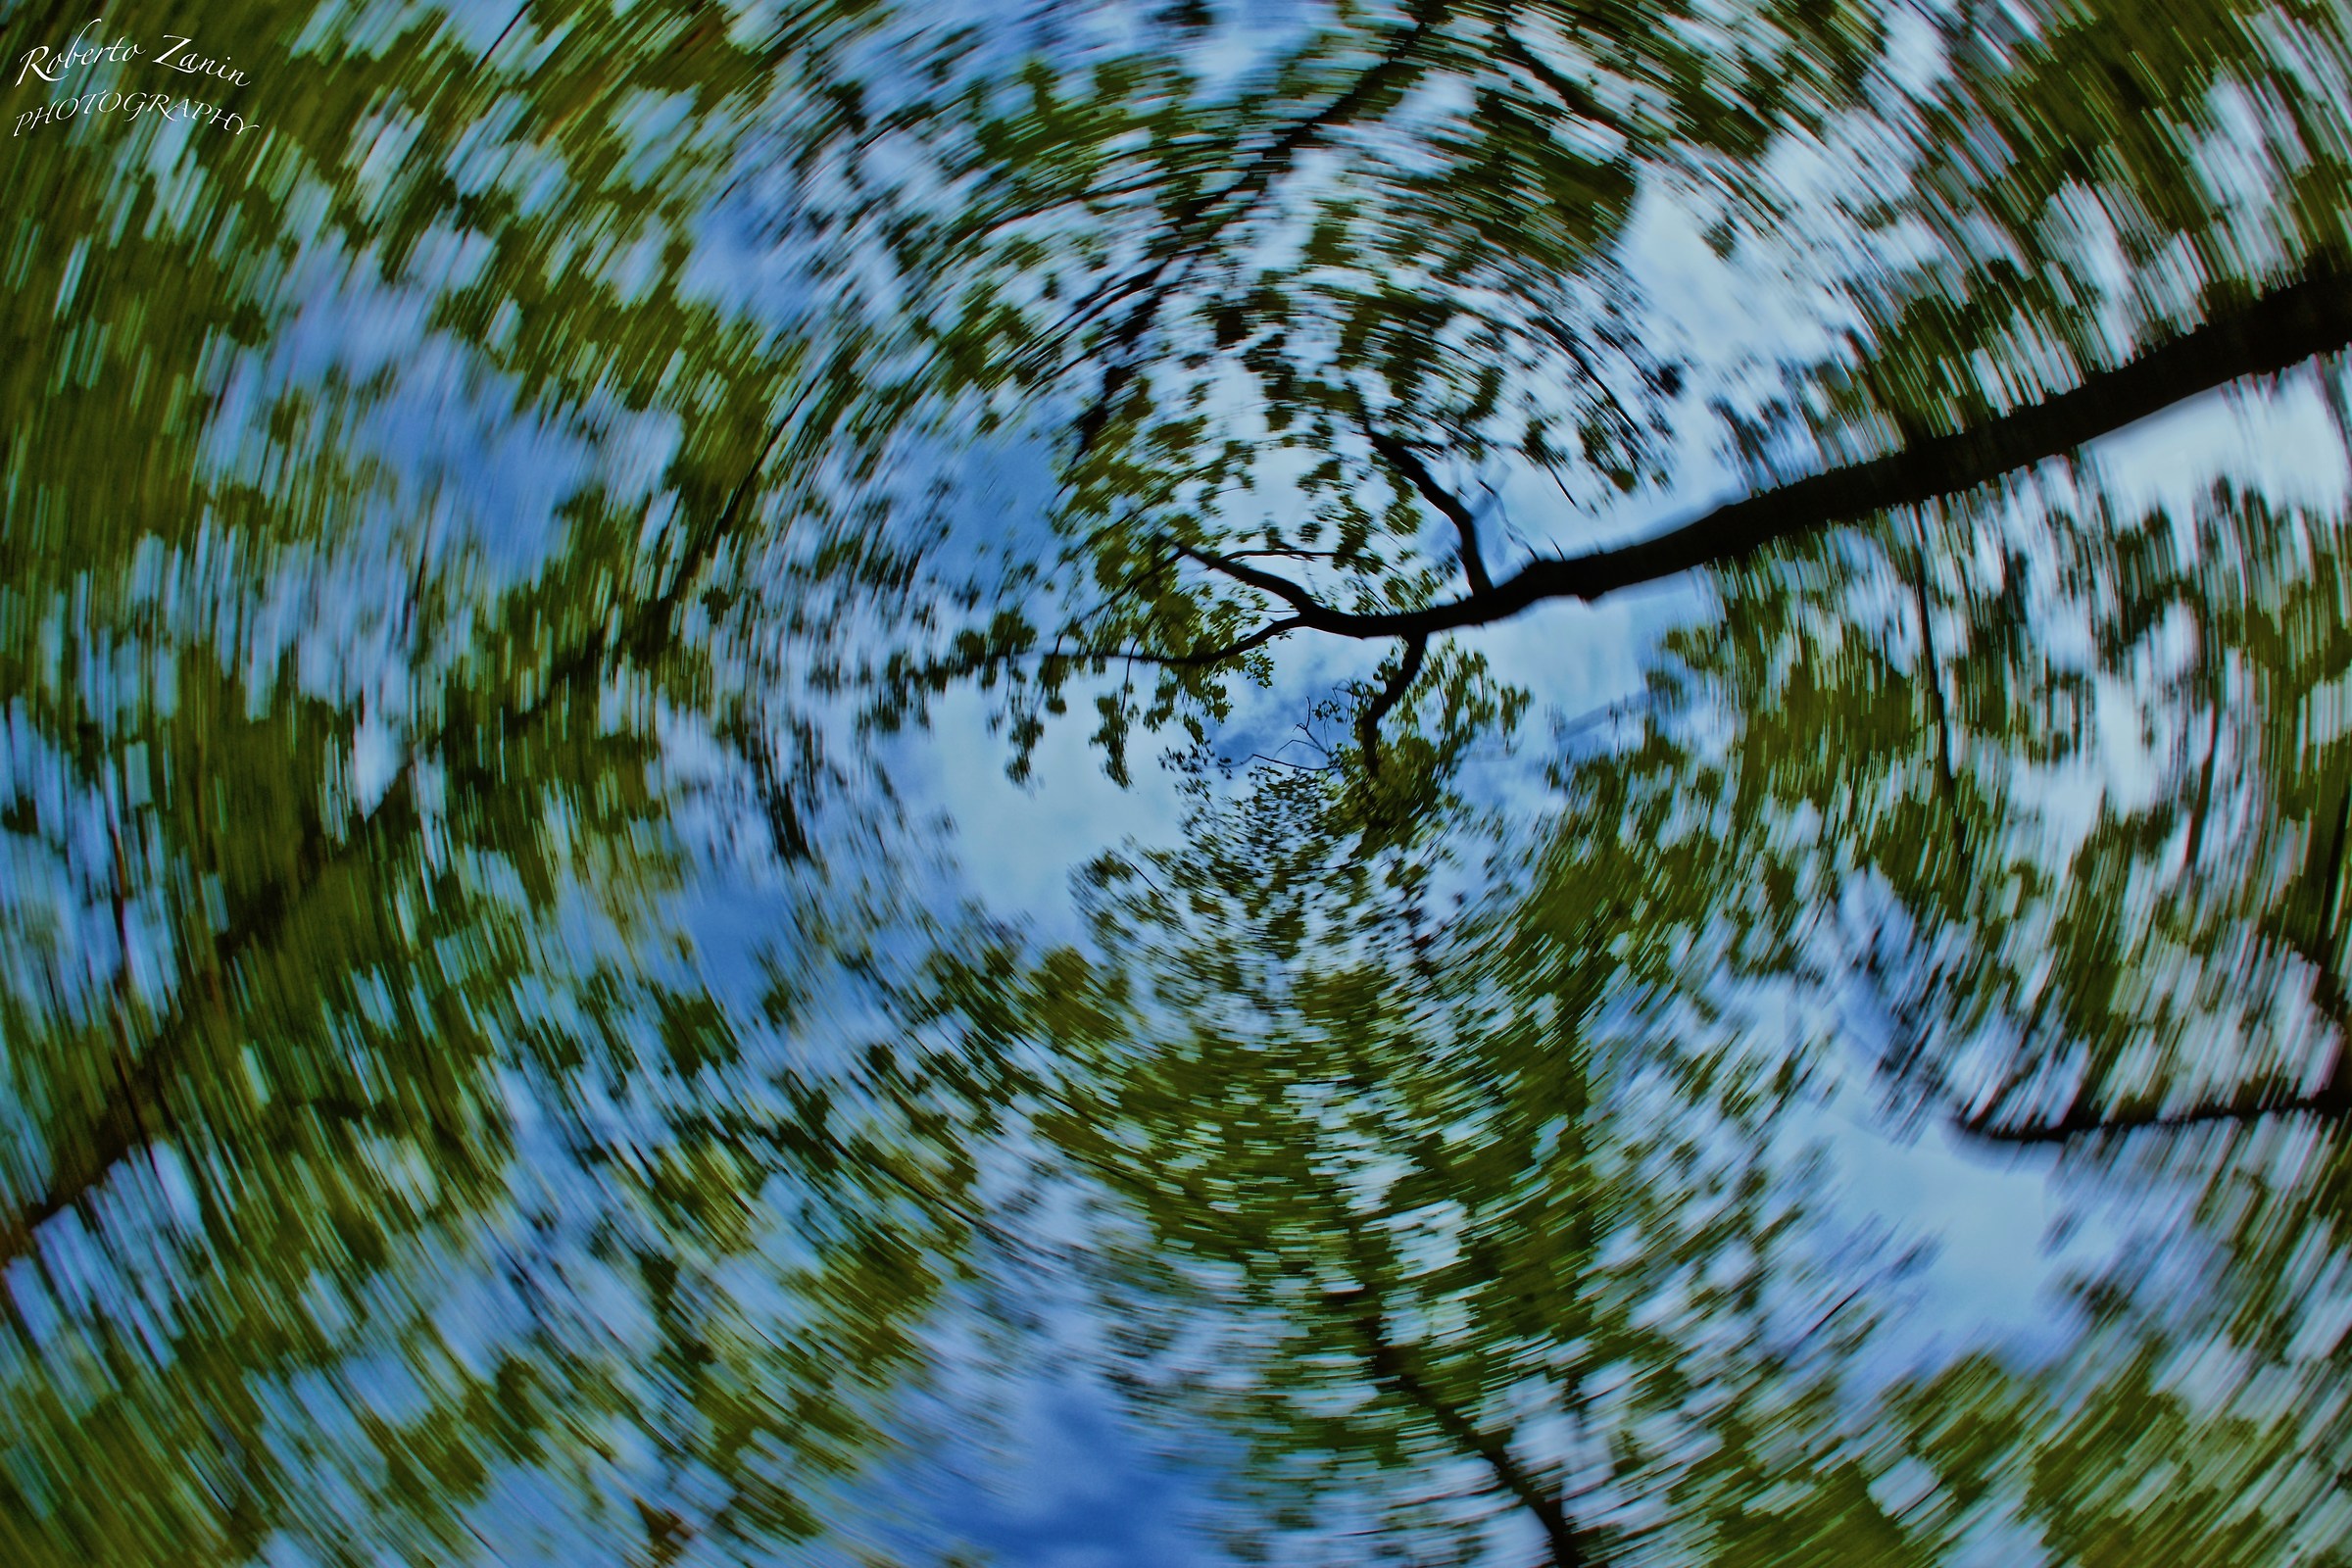 Spinning under the trees...